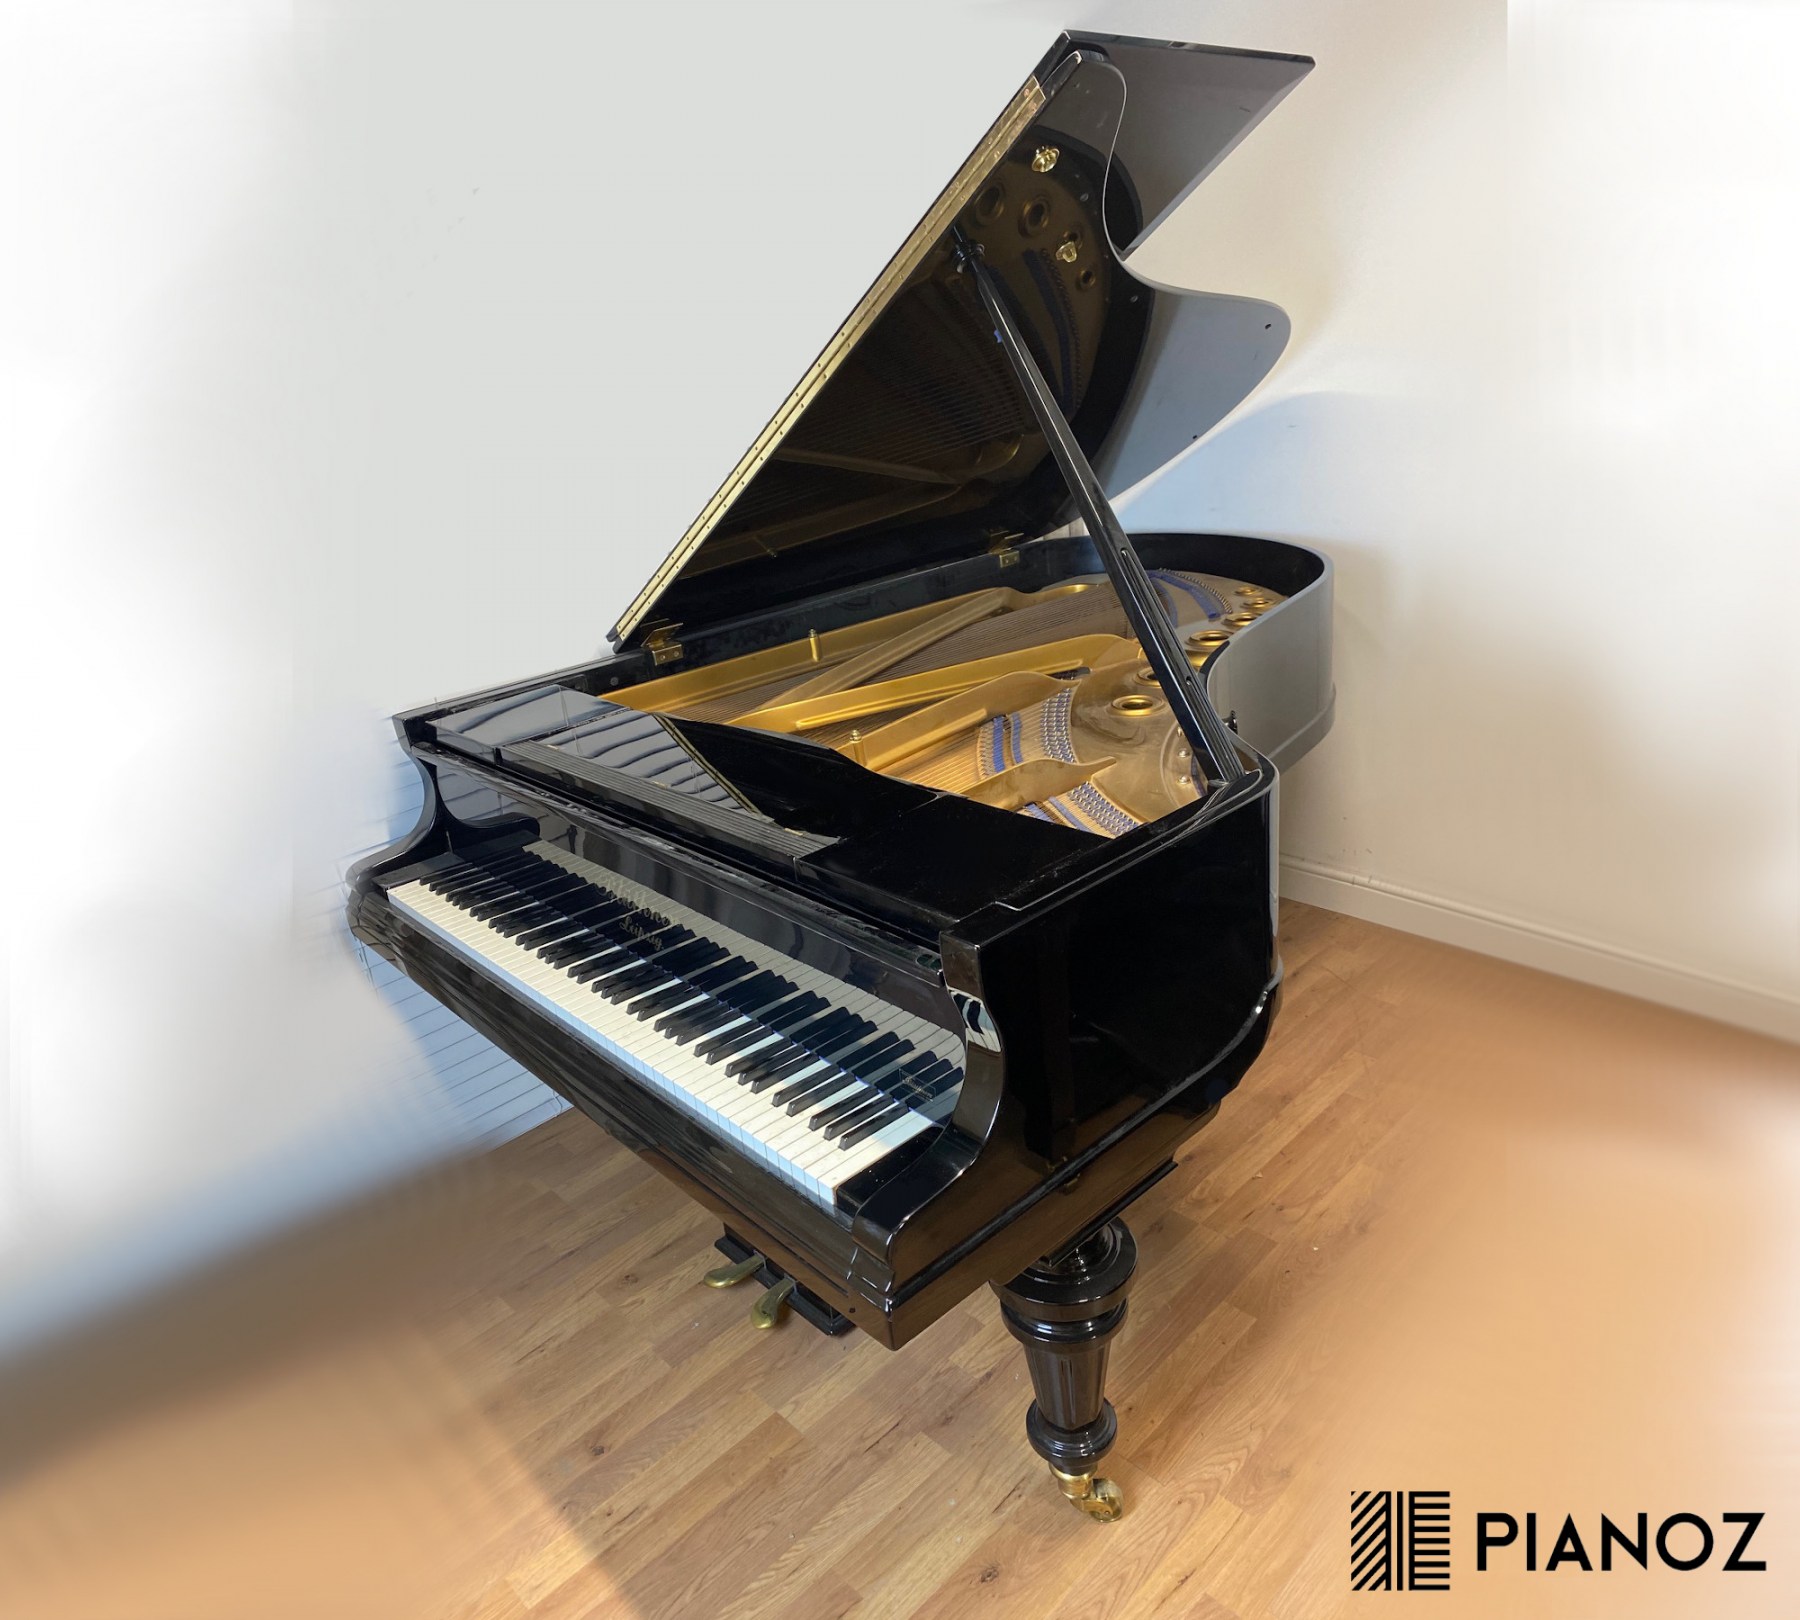 Bluthner  Semi  Concert Grand piano for sale in UK